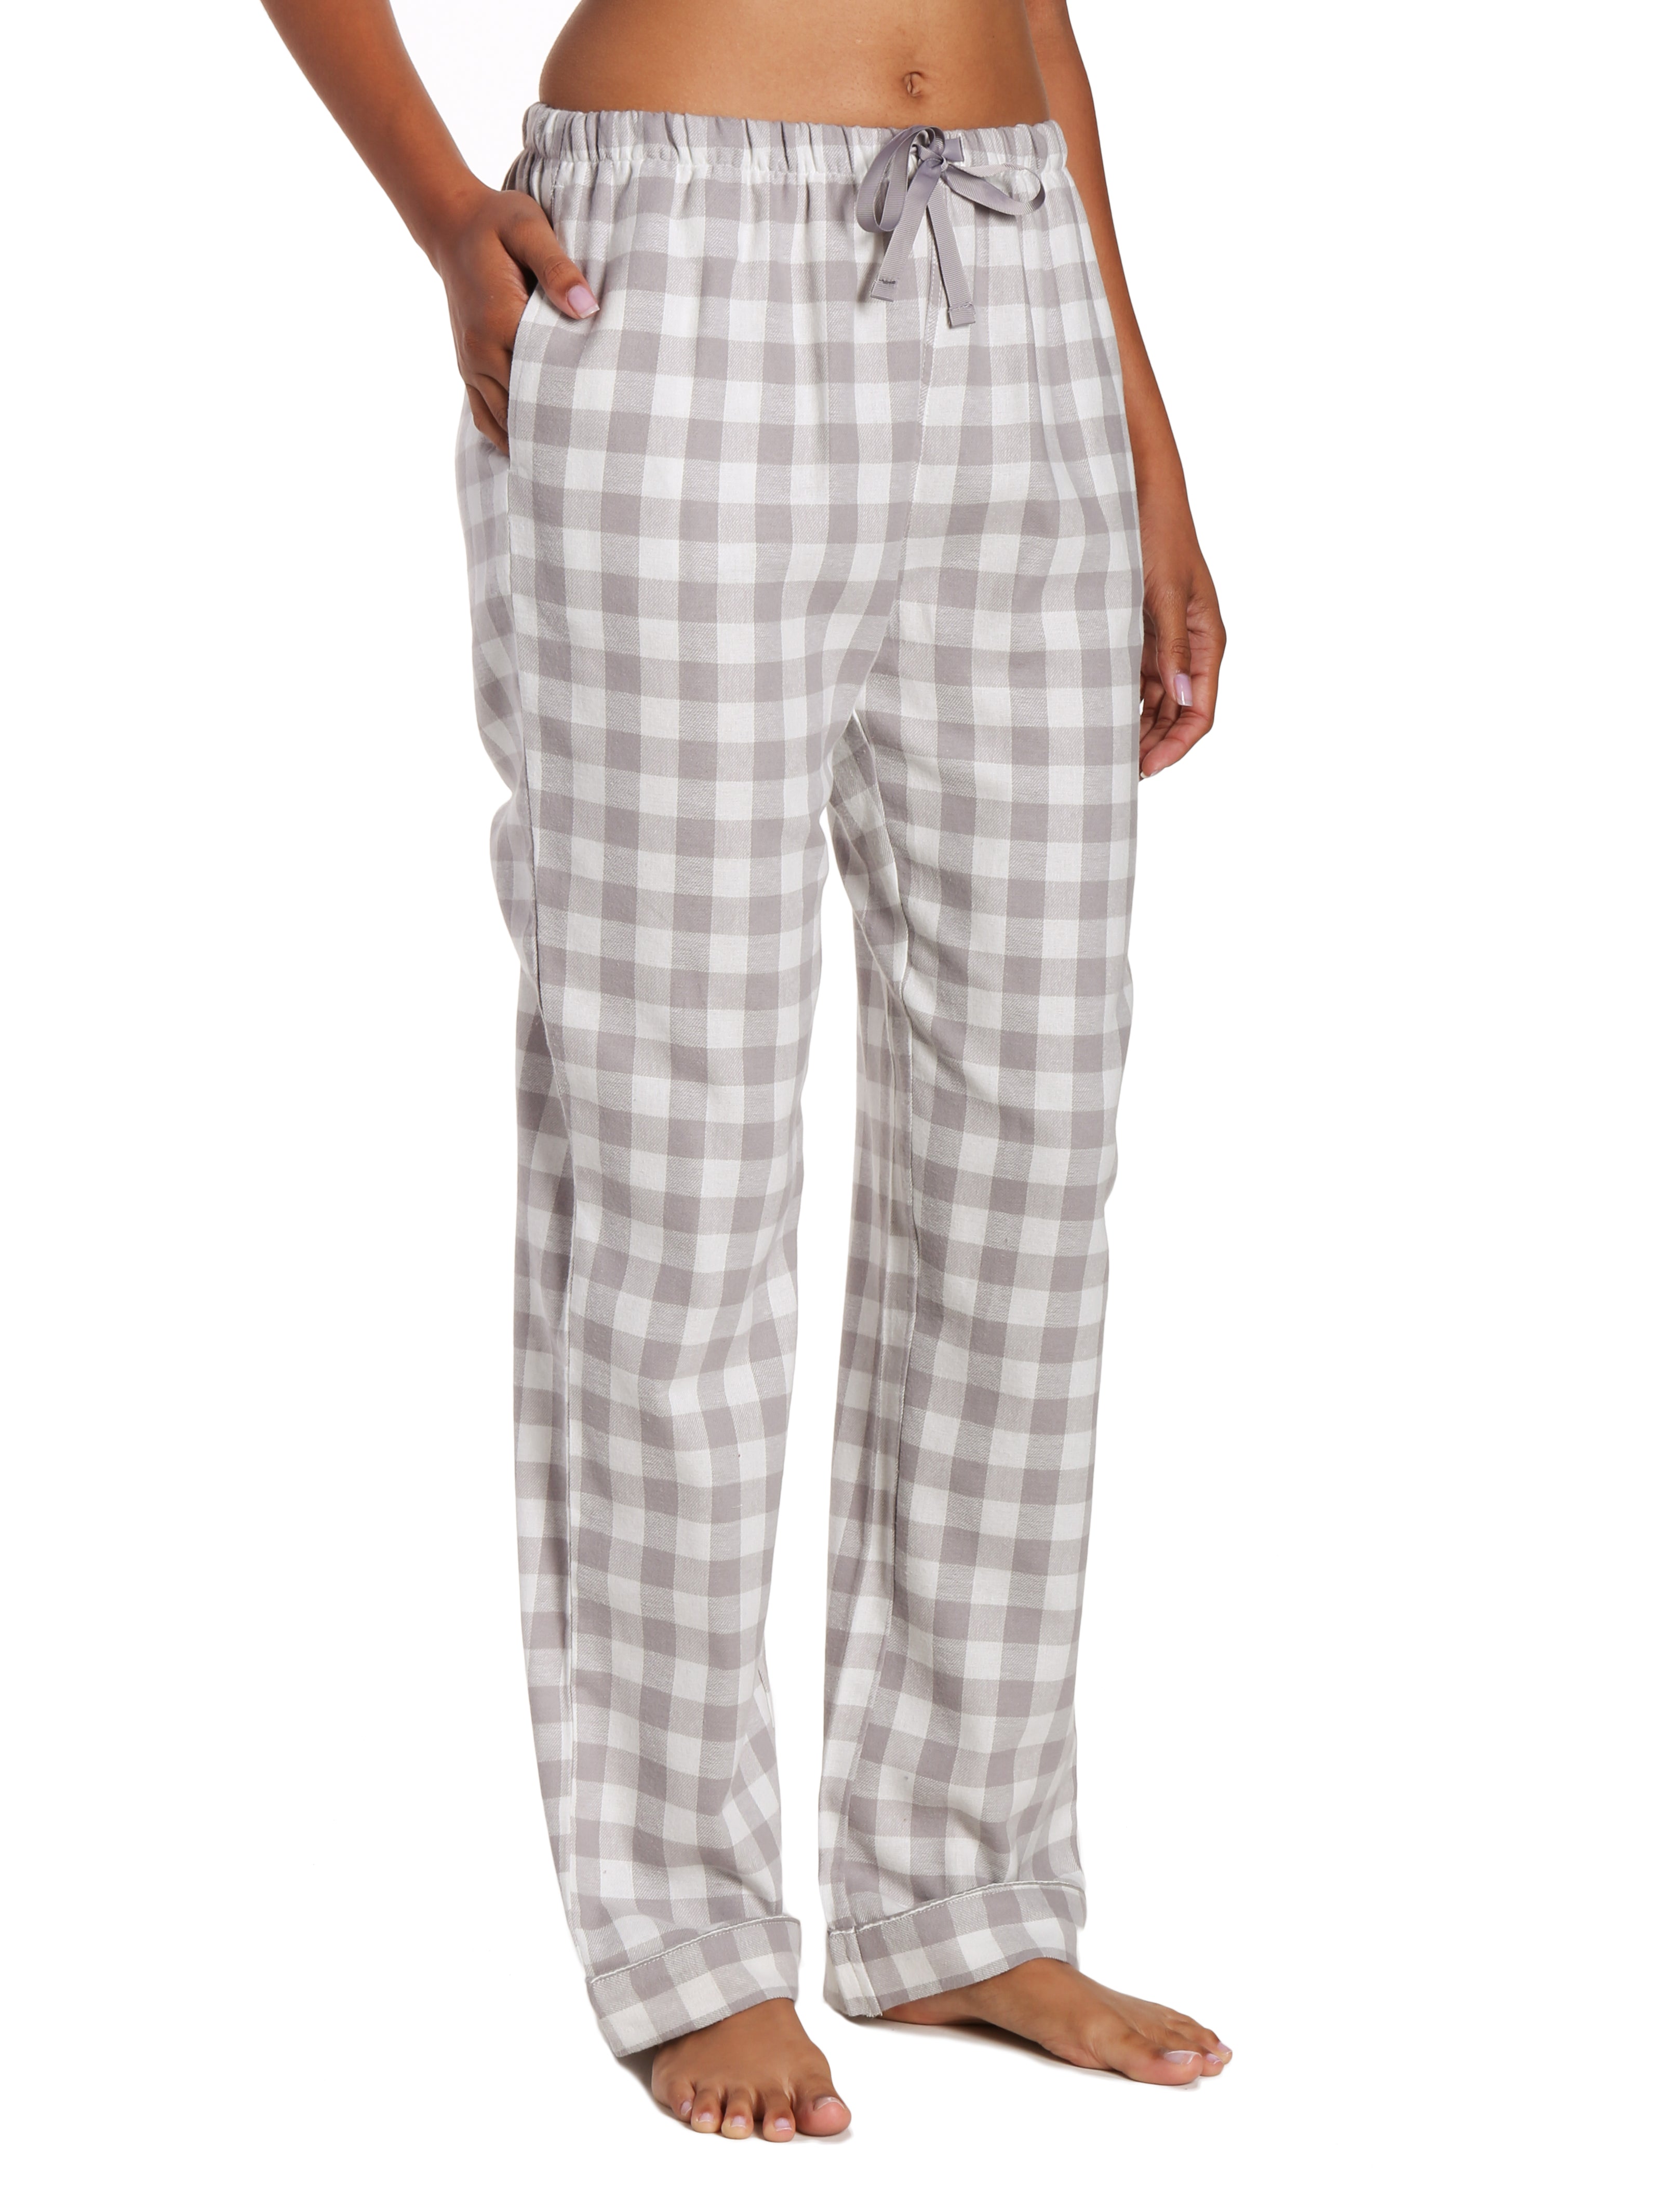 Womens 100% Cotton Lightweight Flannel Lounge Pants - Gingham Gray ...